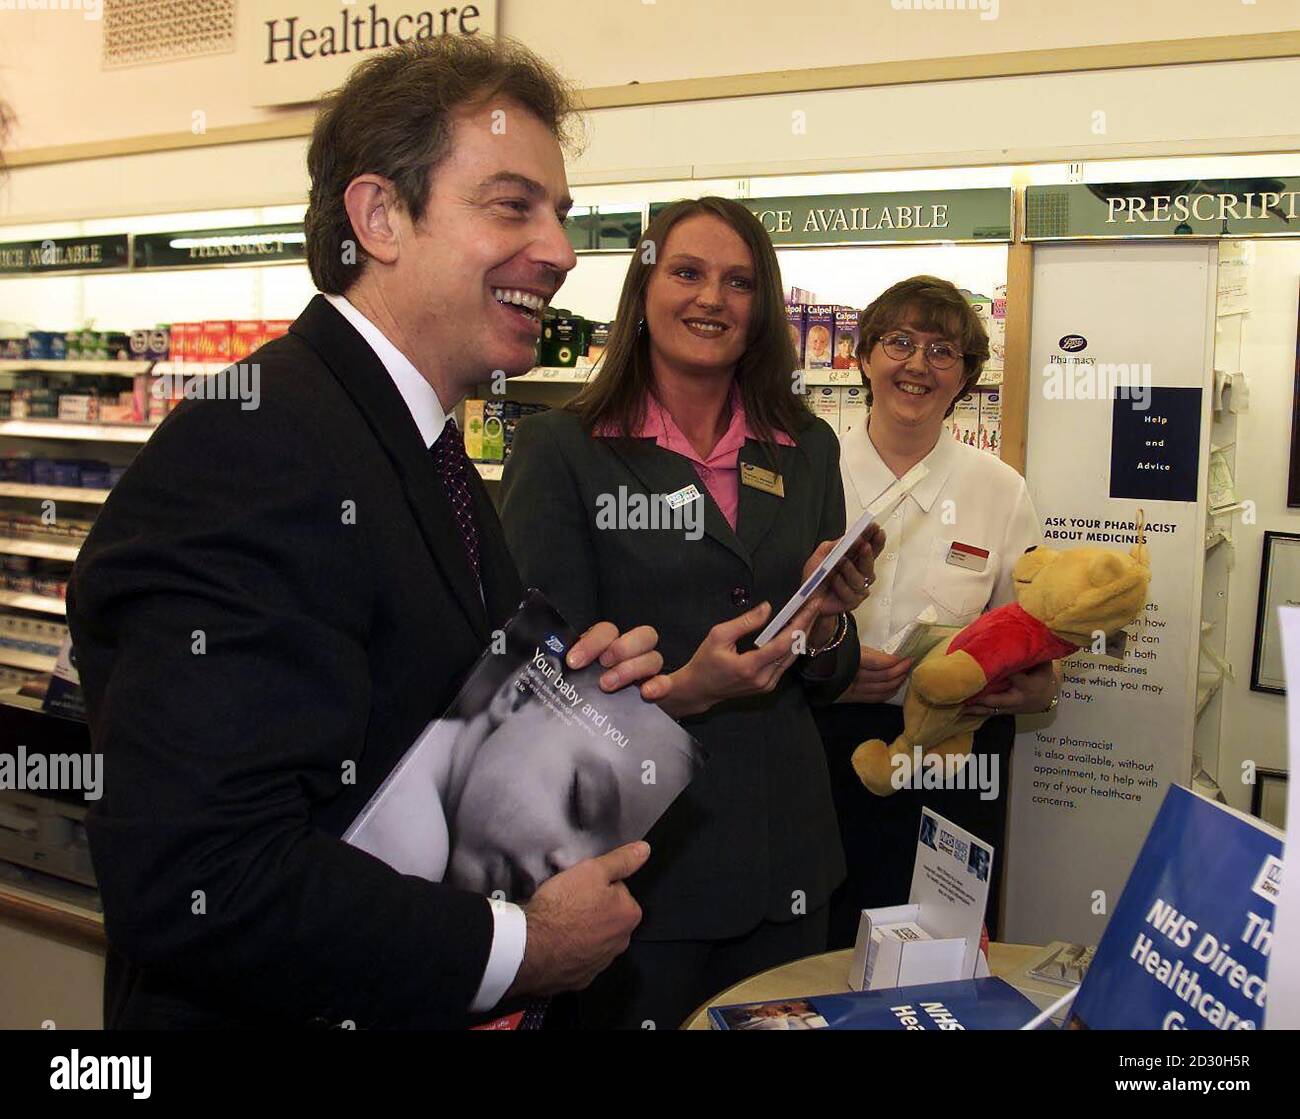 Prime Minister Tony Blair visited The Strand Shopping Centre in Bootle close to Liverpool, where he received a baby book and cuddly toy for the expectant Blair family, from the staff at 'Boots' chemist.  *This is the second day of the Prime Minister's trip to the north-west of England as part of a tour to Stock Photo